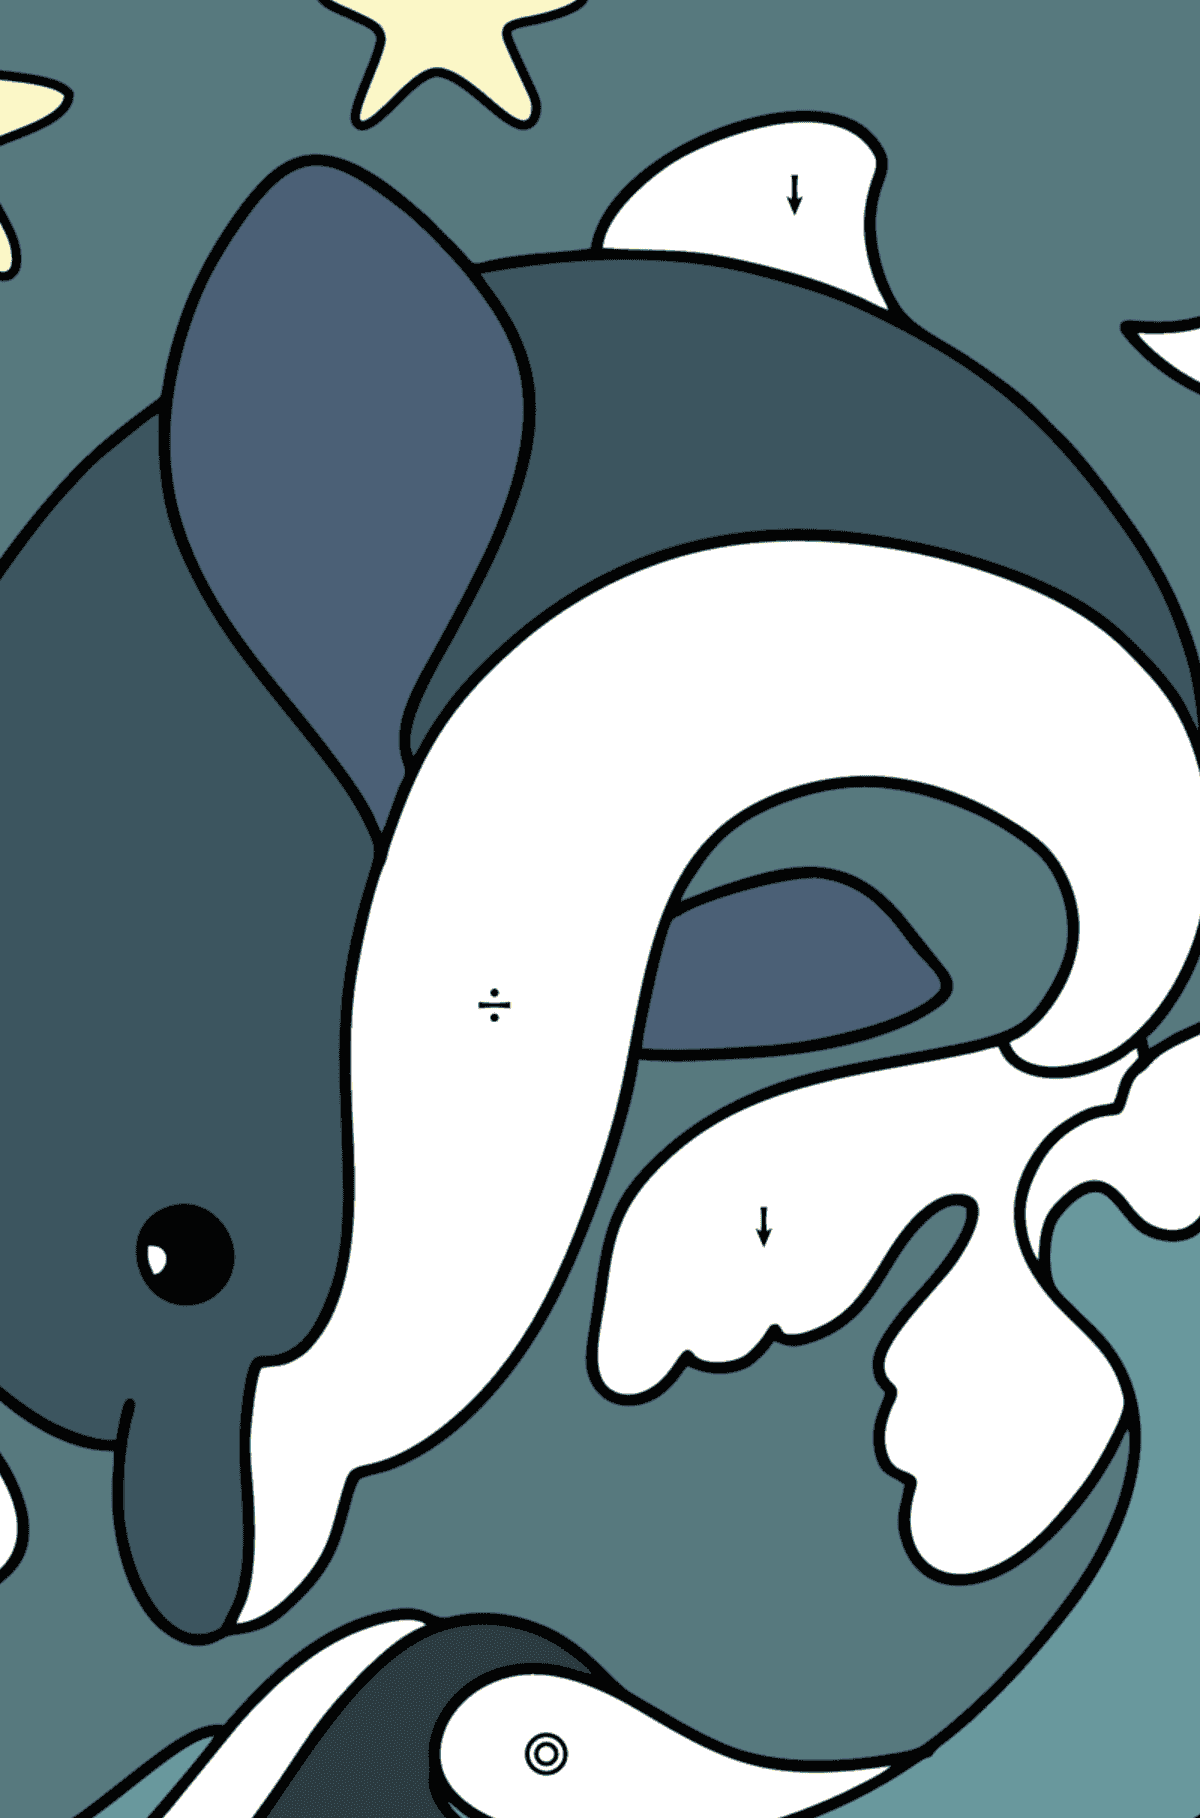 Dolphin in the Sea coloring page - Coloring by Symbols and Geometric Shapes for Kids